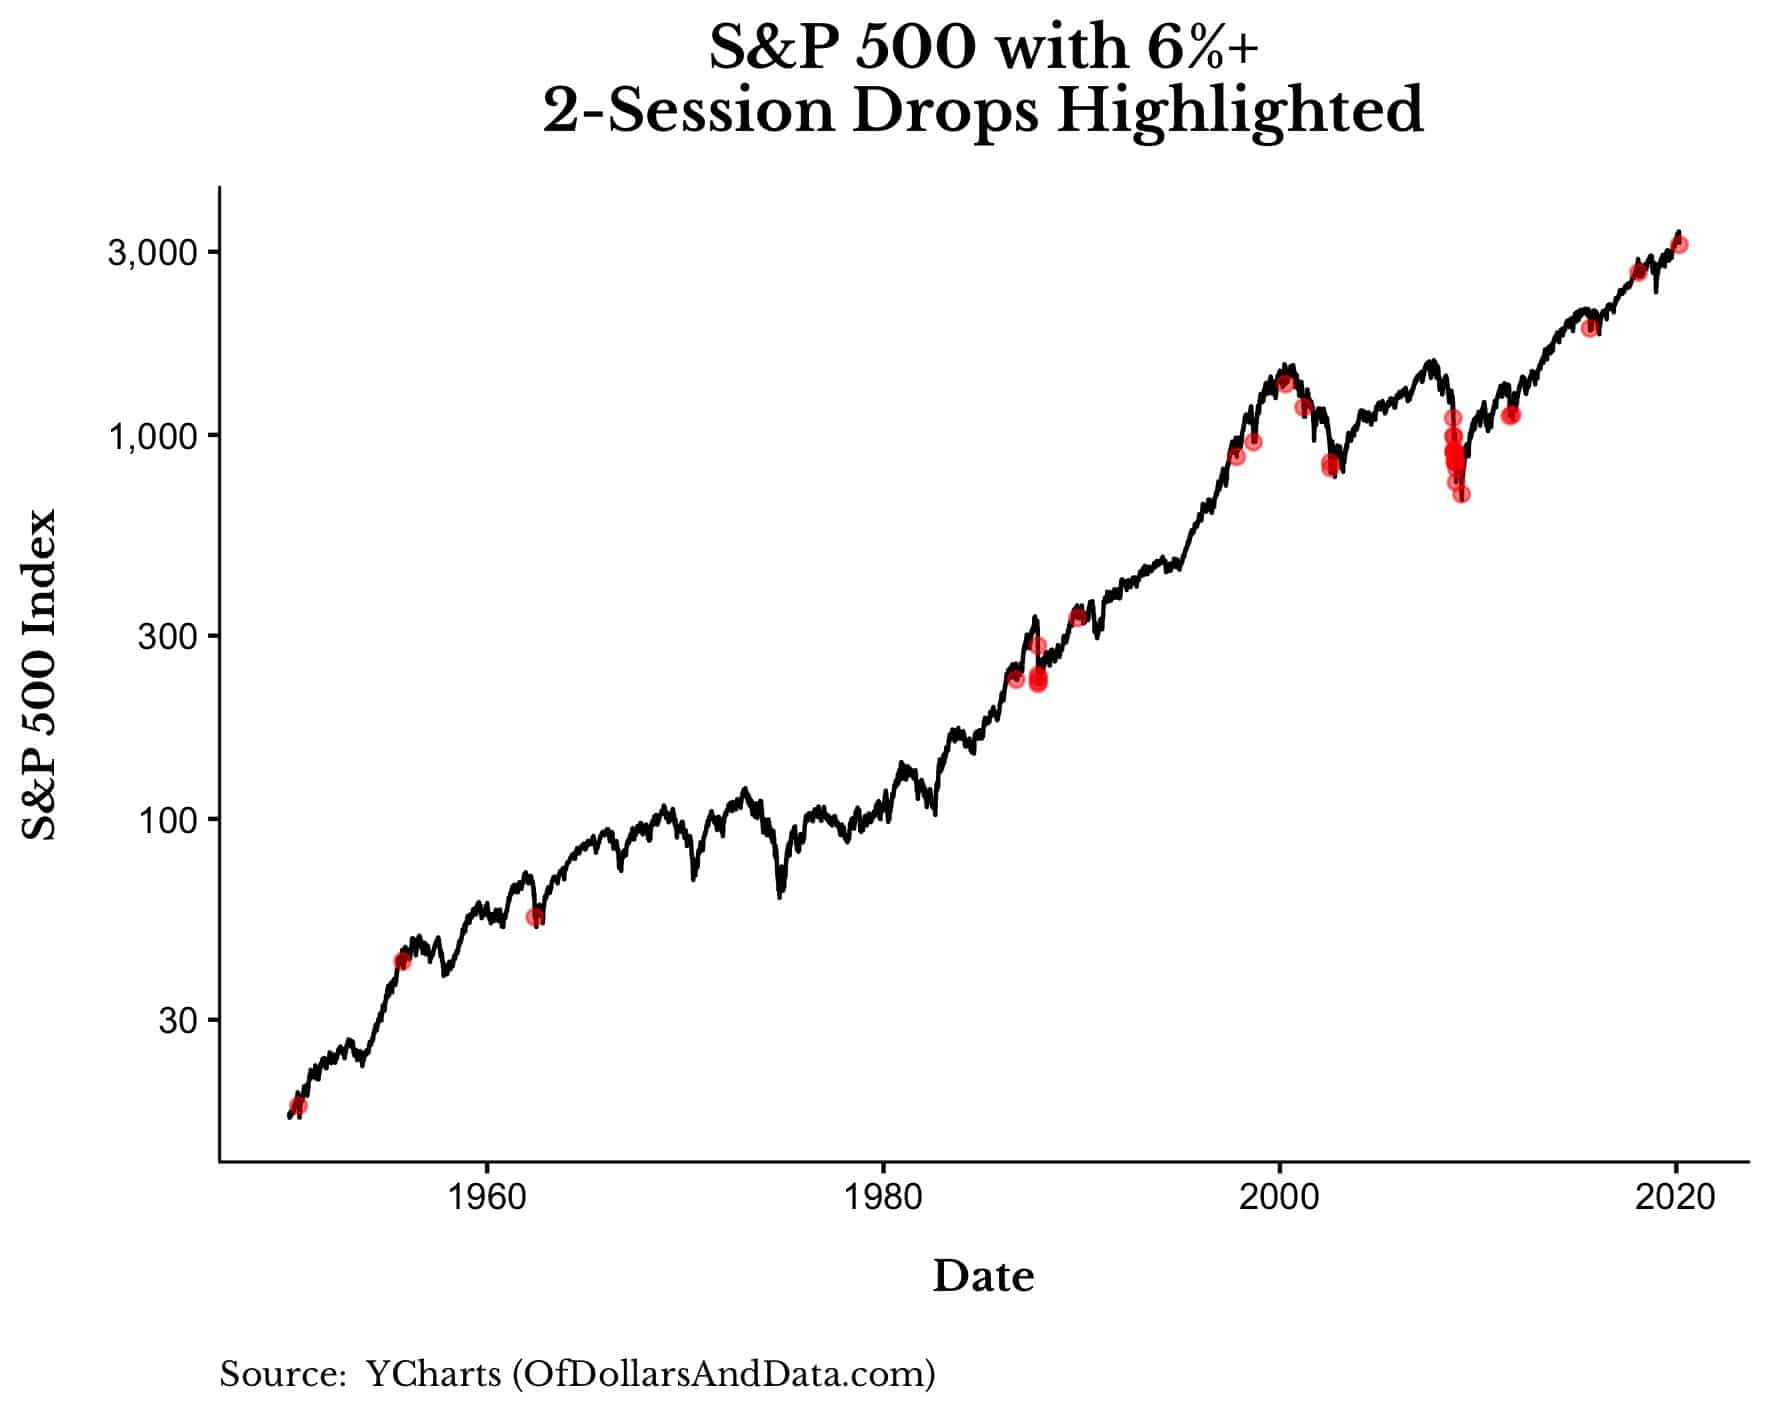 S&P 500 with every 6% 2-session drop highlighted since 1950.